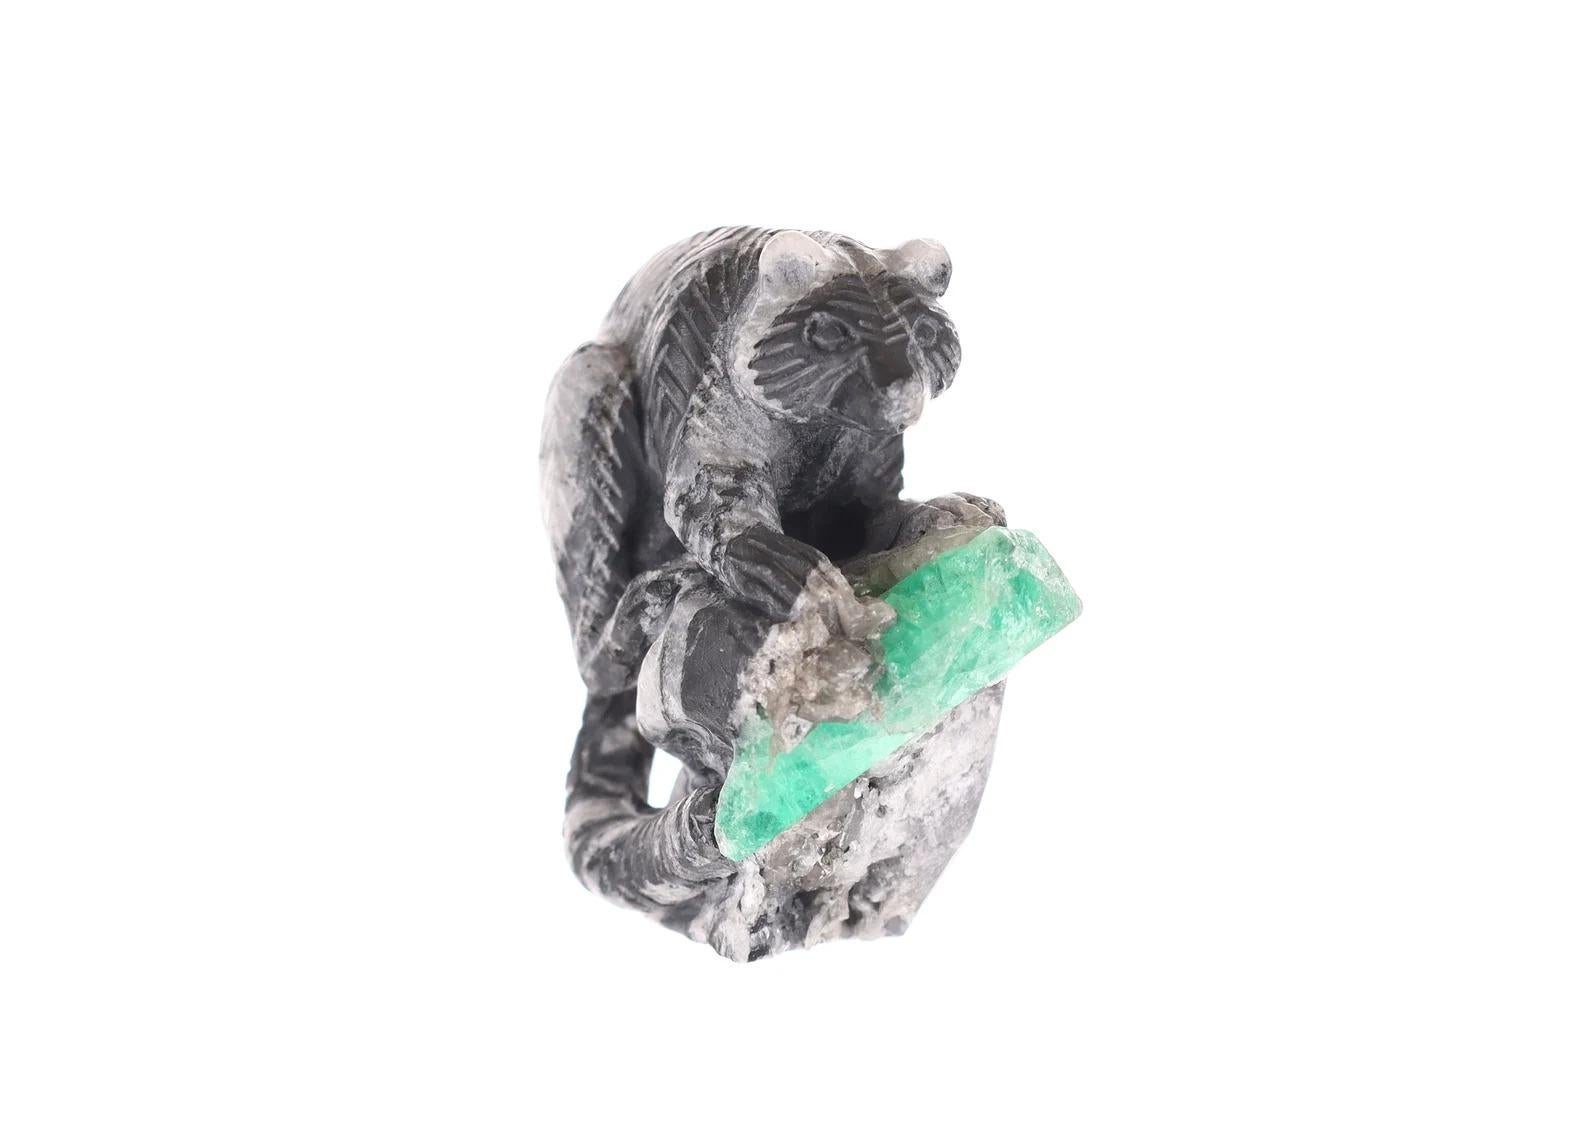 This beautiful and one-of-a-kind rough Colombian emerald sculpture. Featuring the one and only red panda; hand-carved with intricate detail along its coat and tail made of black and gray shale. The panda sits over a cliff with a natural Colombian